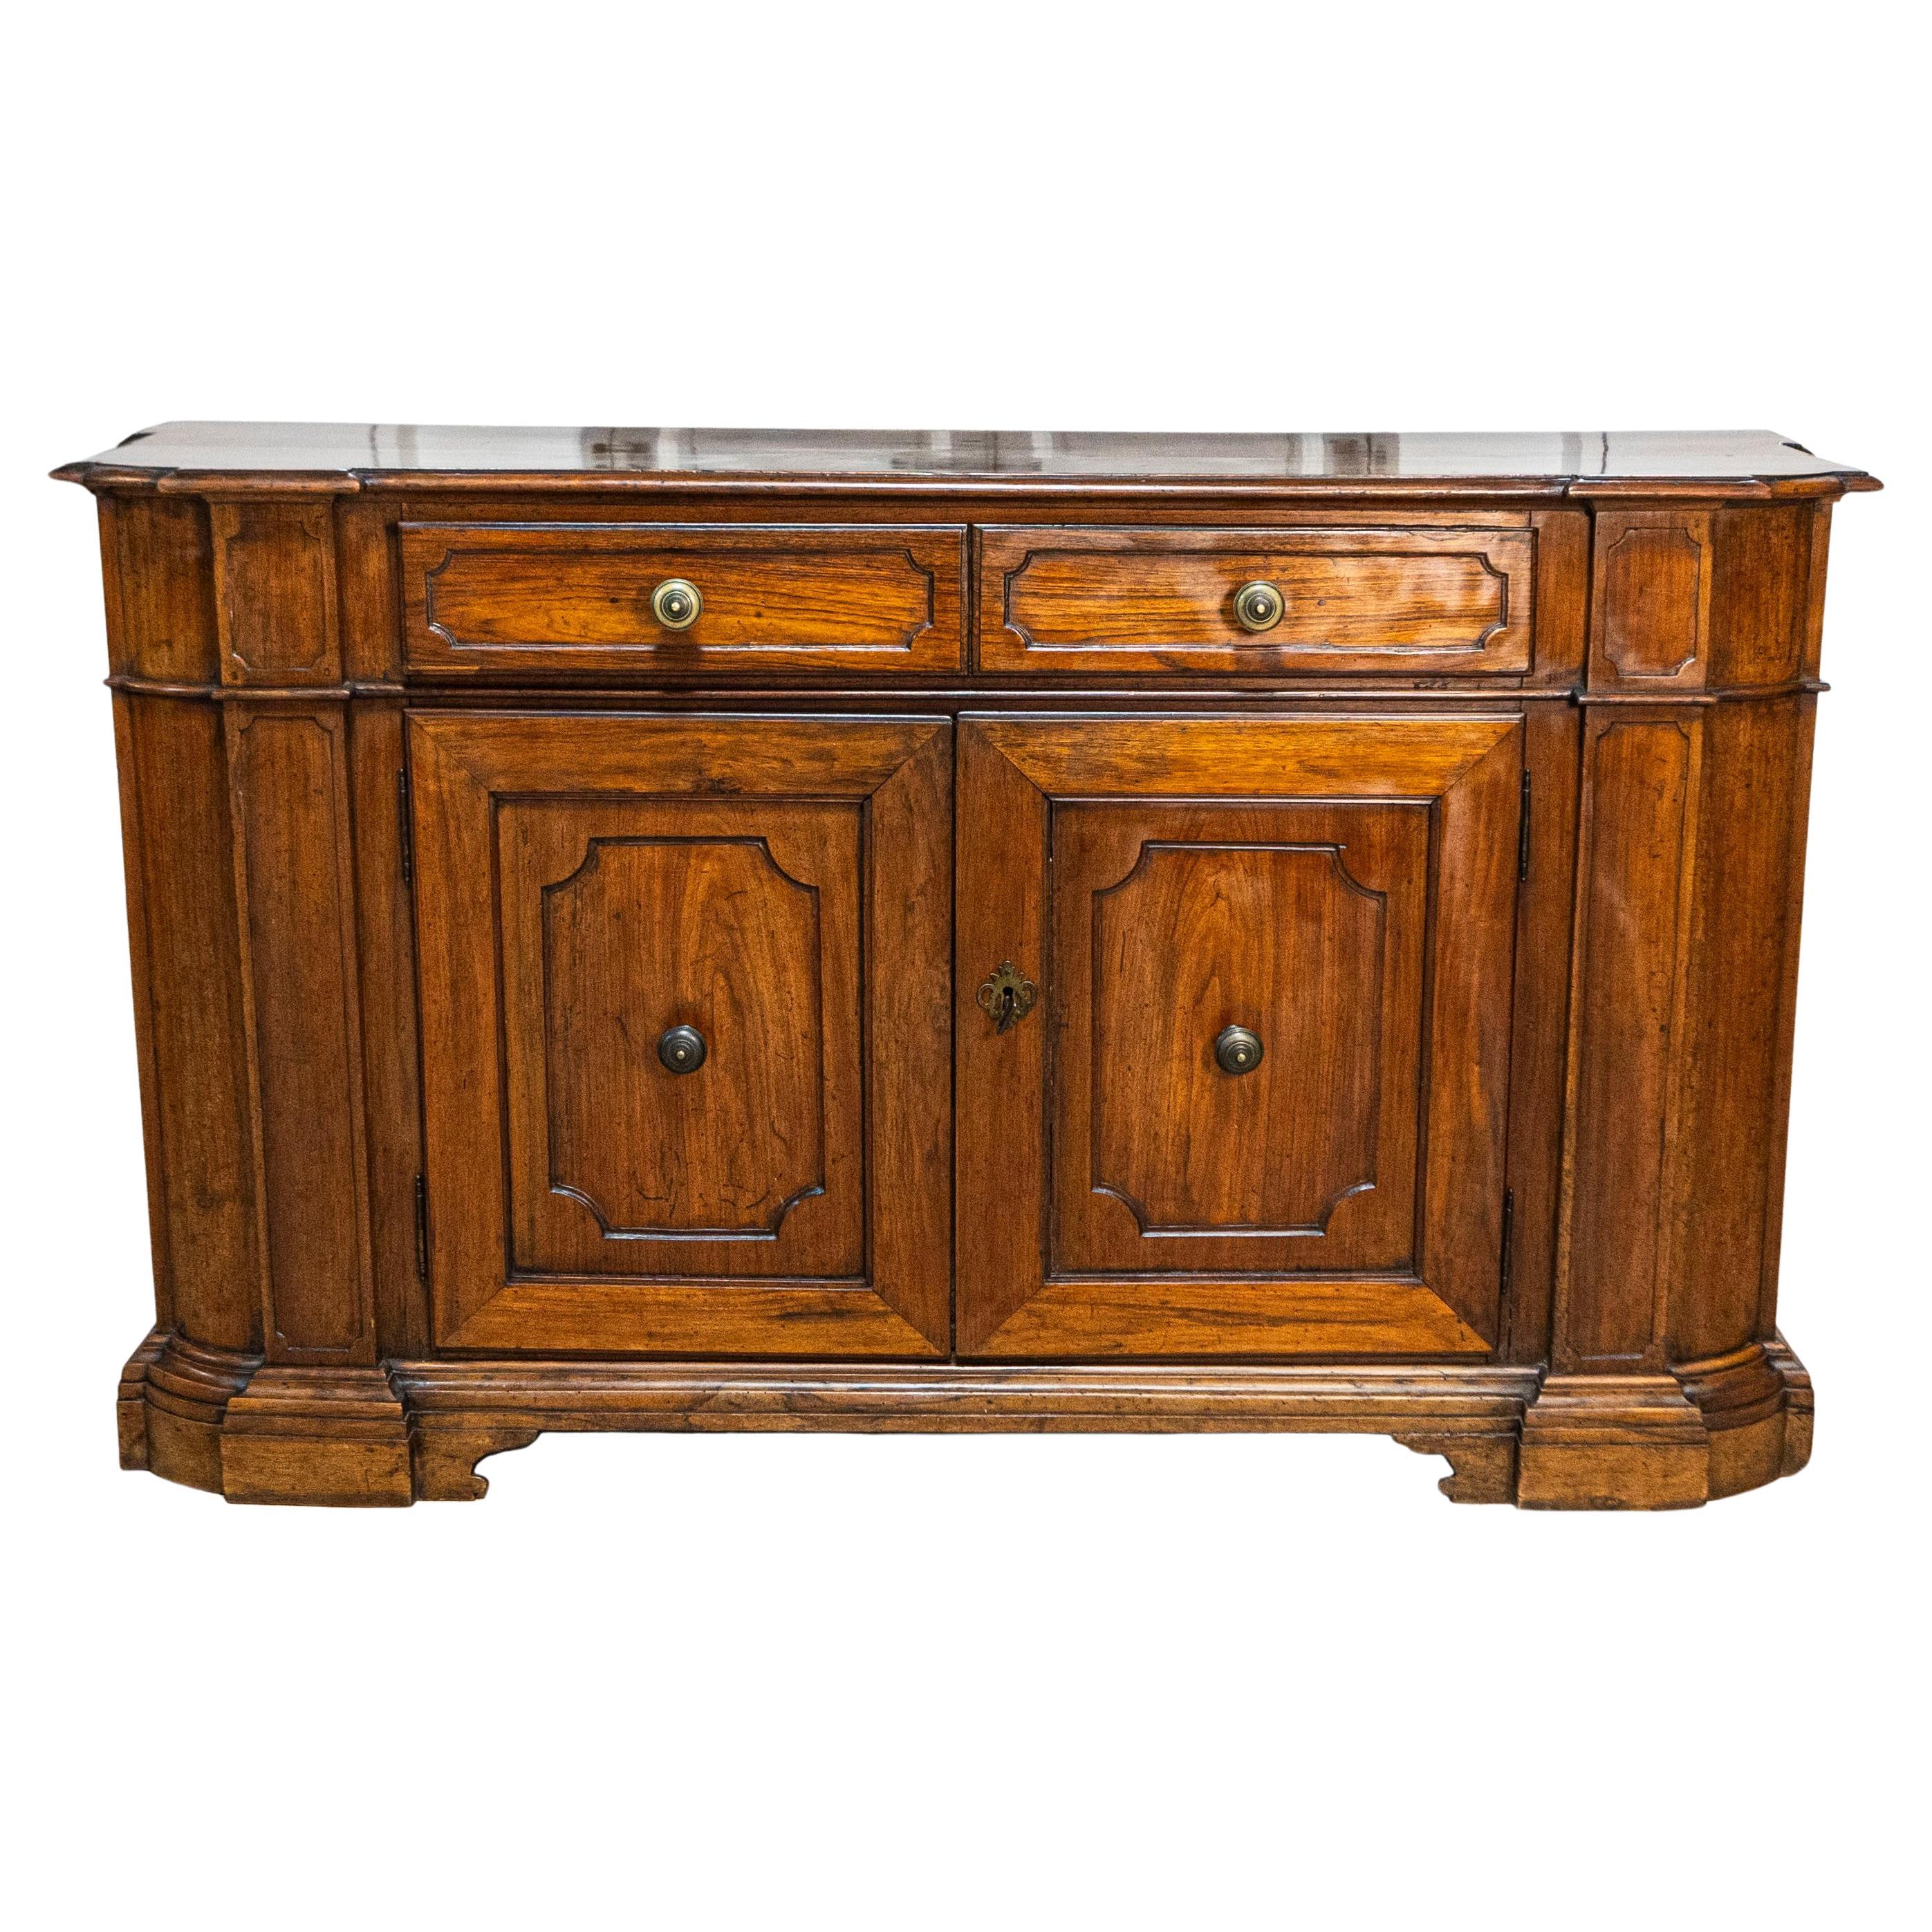 Italian 1700s Walnut Credenza with Four Drawers, Four Doors and Pilasters